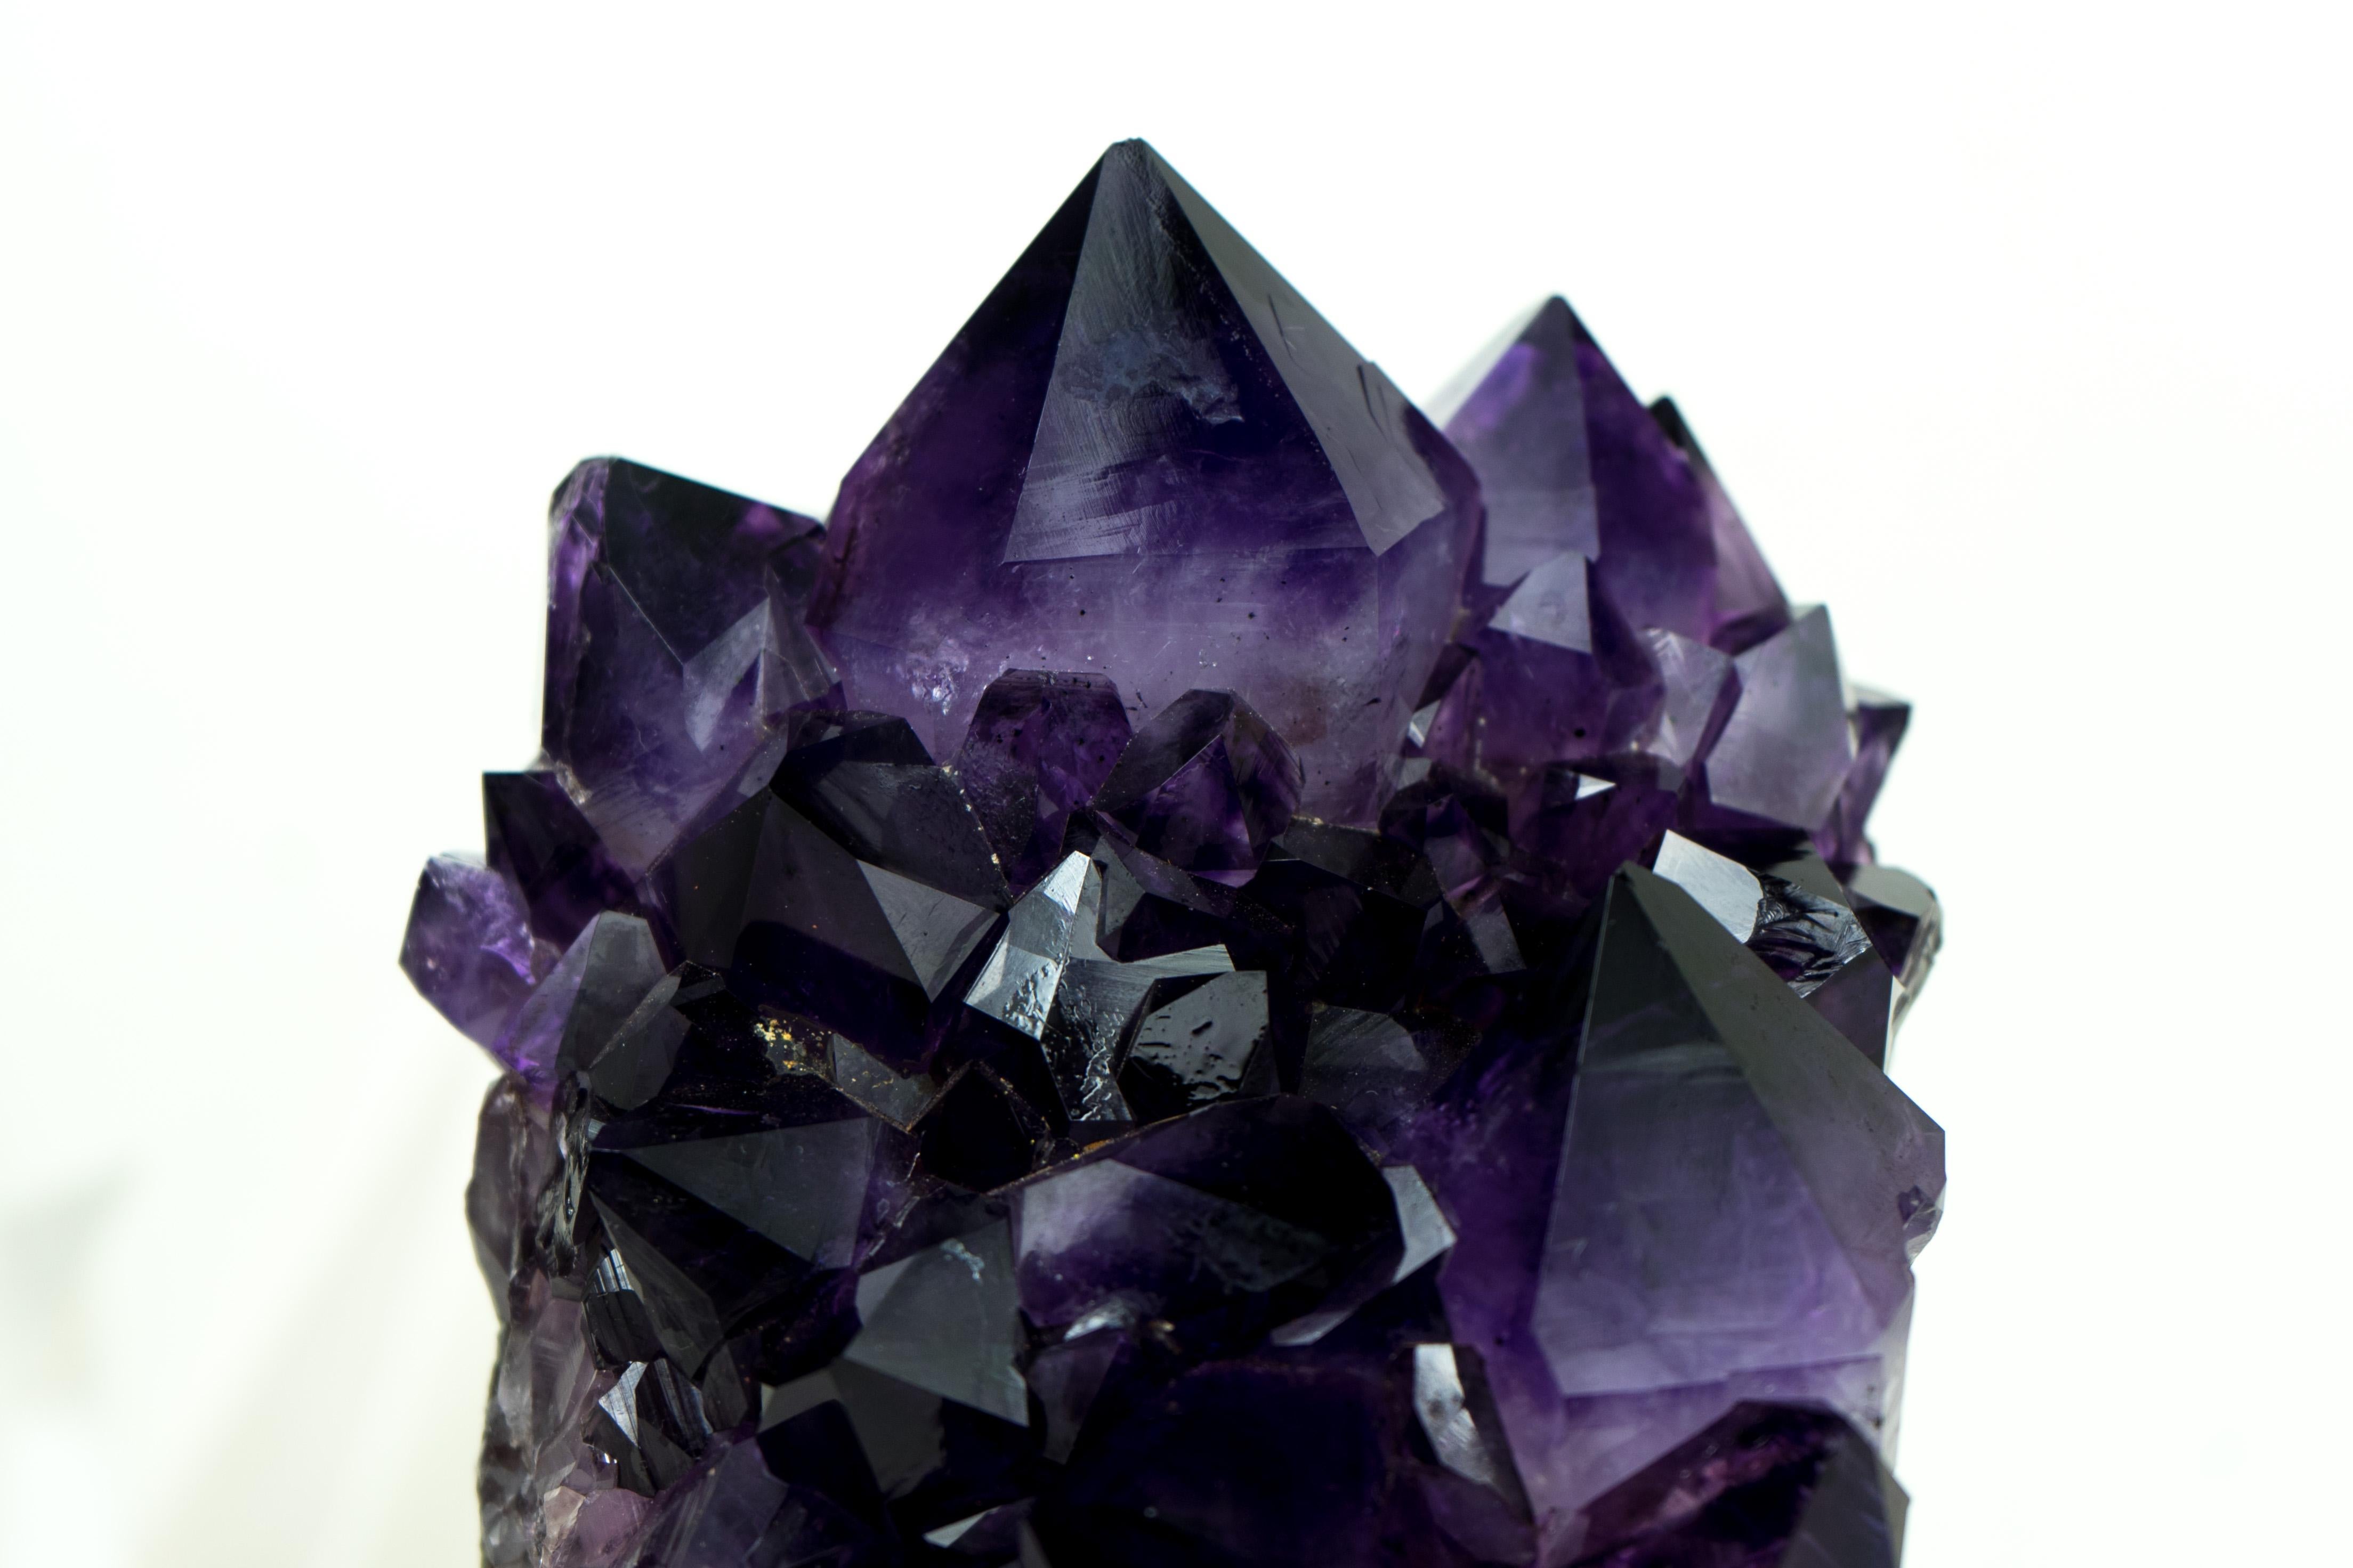 This AAA-Grade Amethyst Cluster stands as an extraordinary gem with world-class characteristics. Featuring dark, rich, and AAA-Grade Amethyst Druzy, this cluster brings unparalleled beauty and aesthetics, surely becoming an ideal addition for